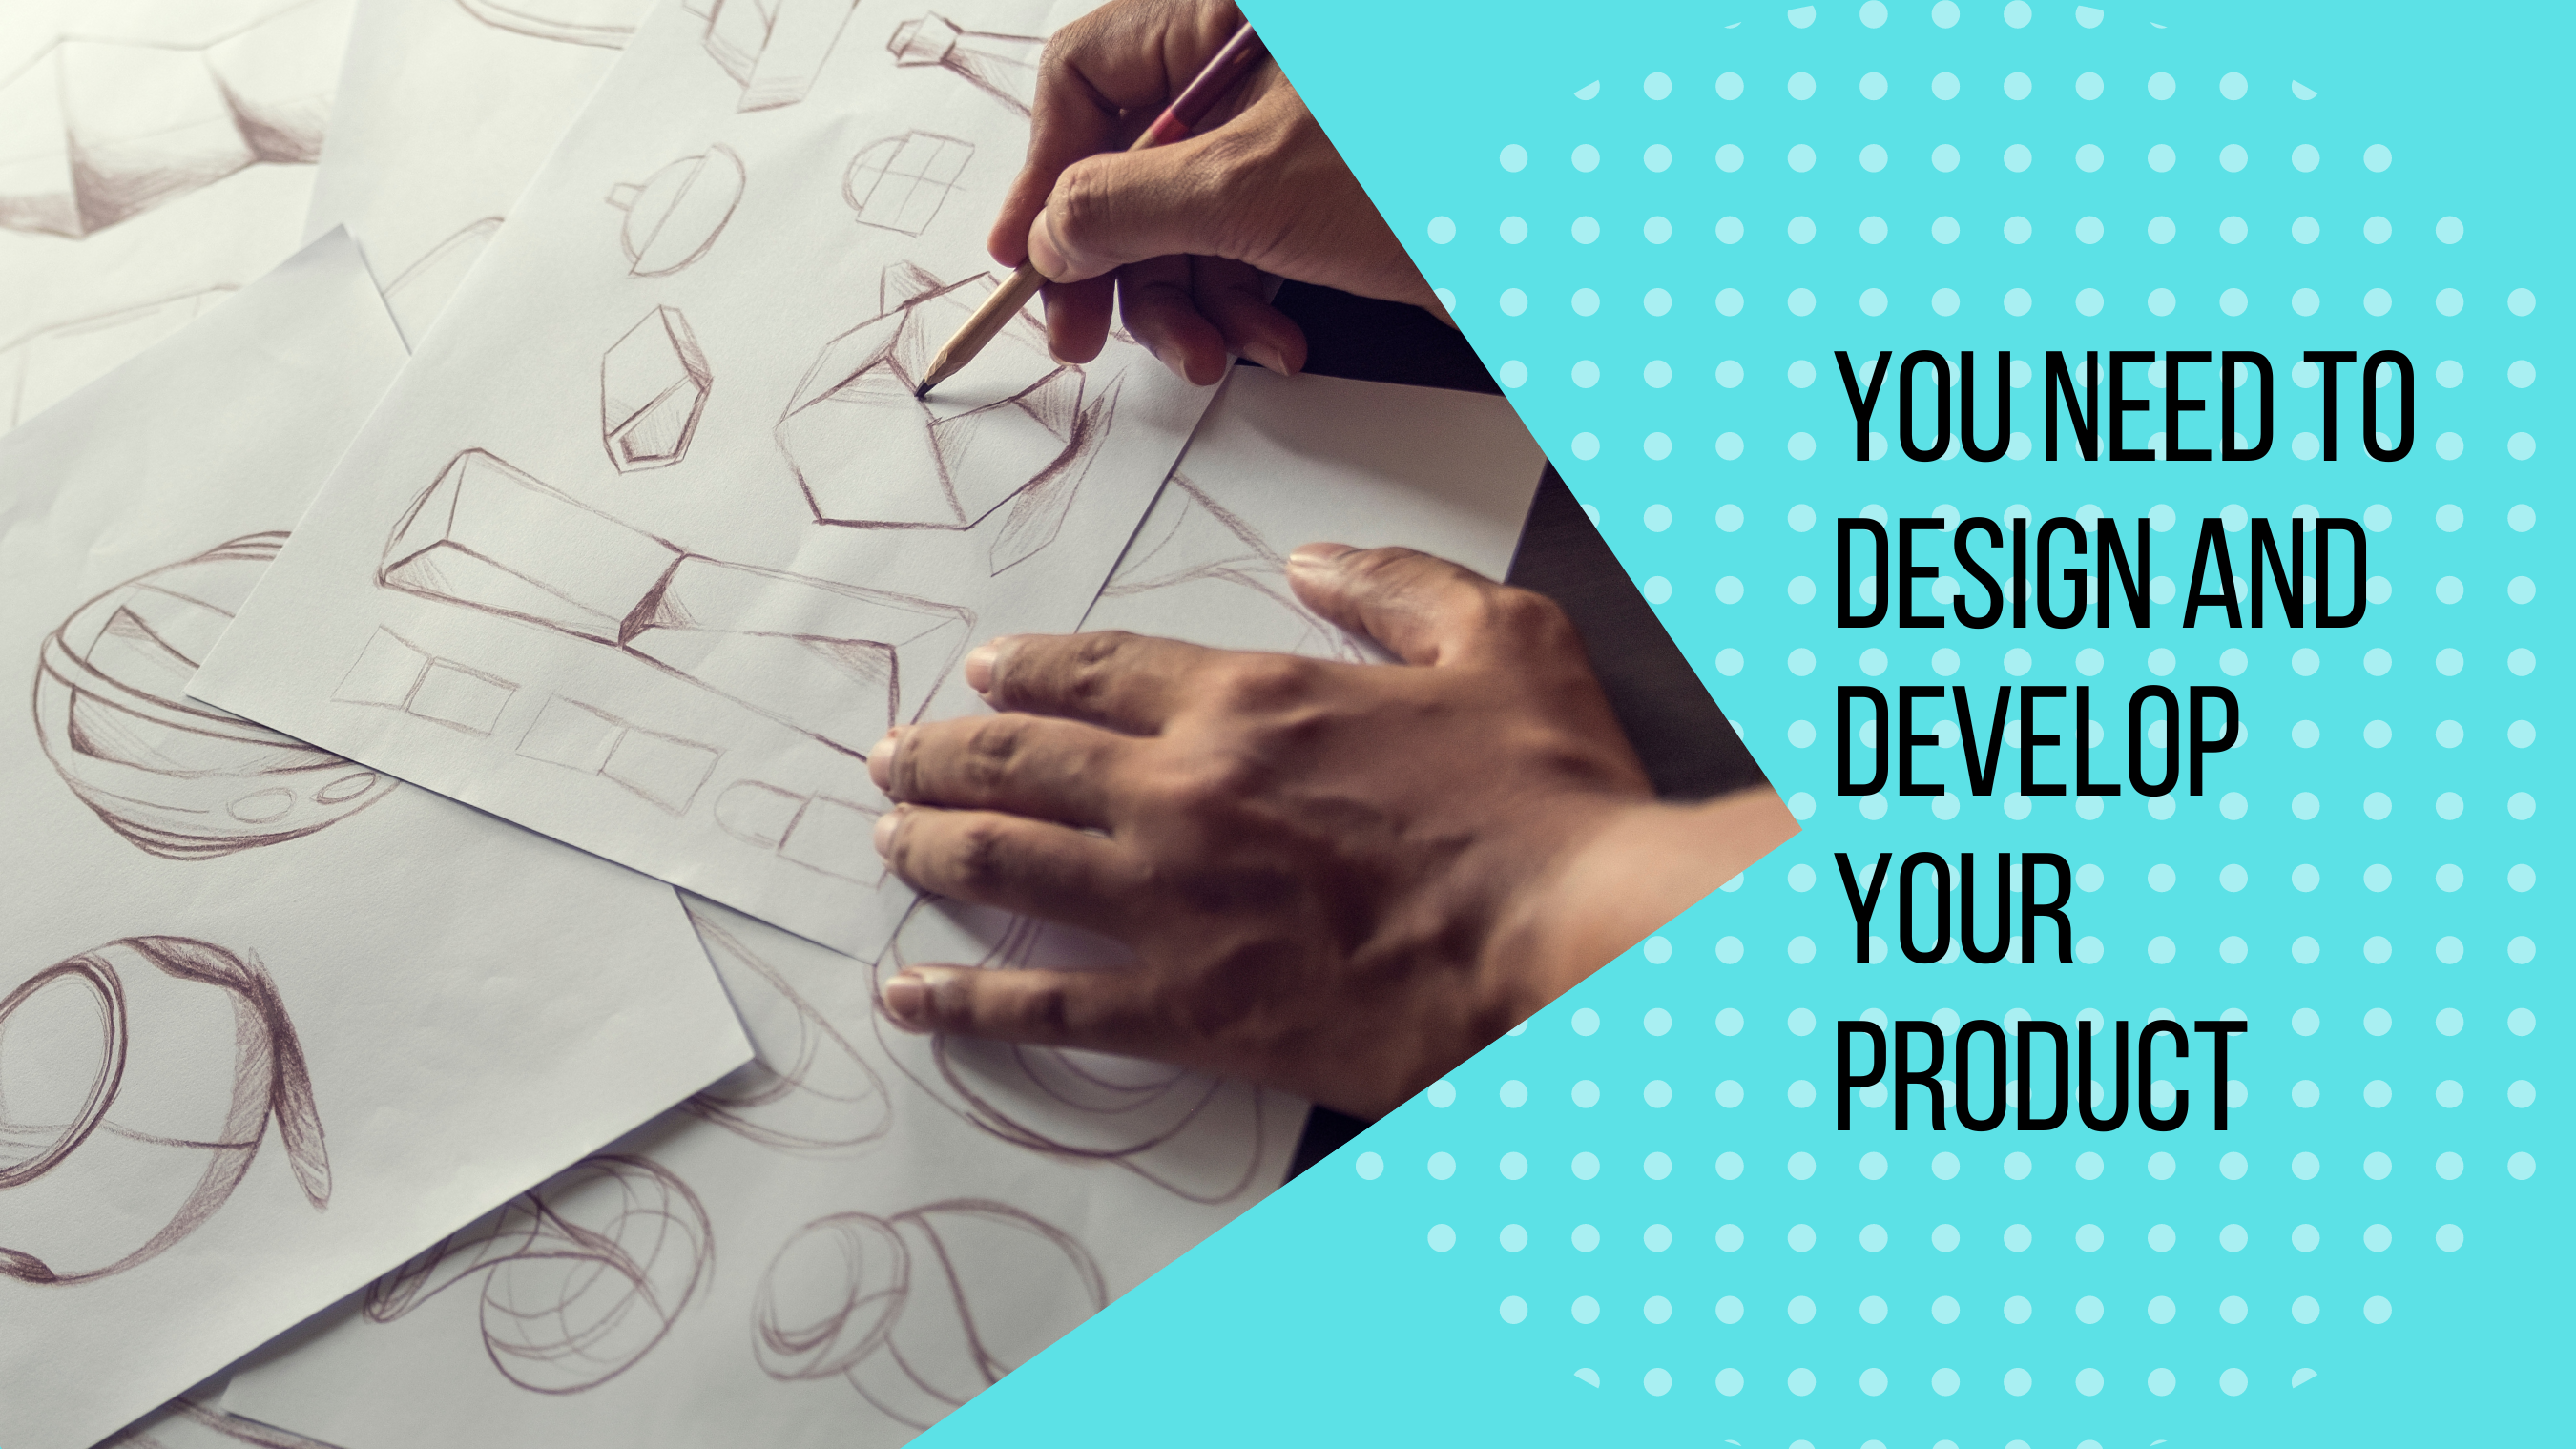 design and develop product for business